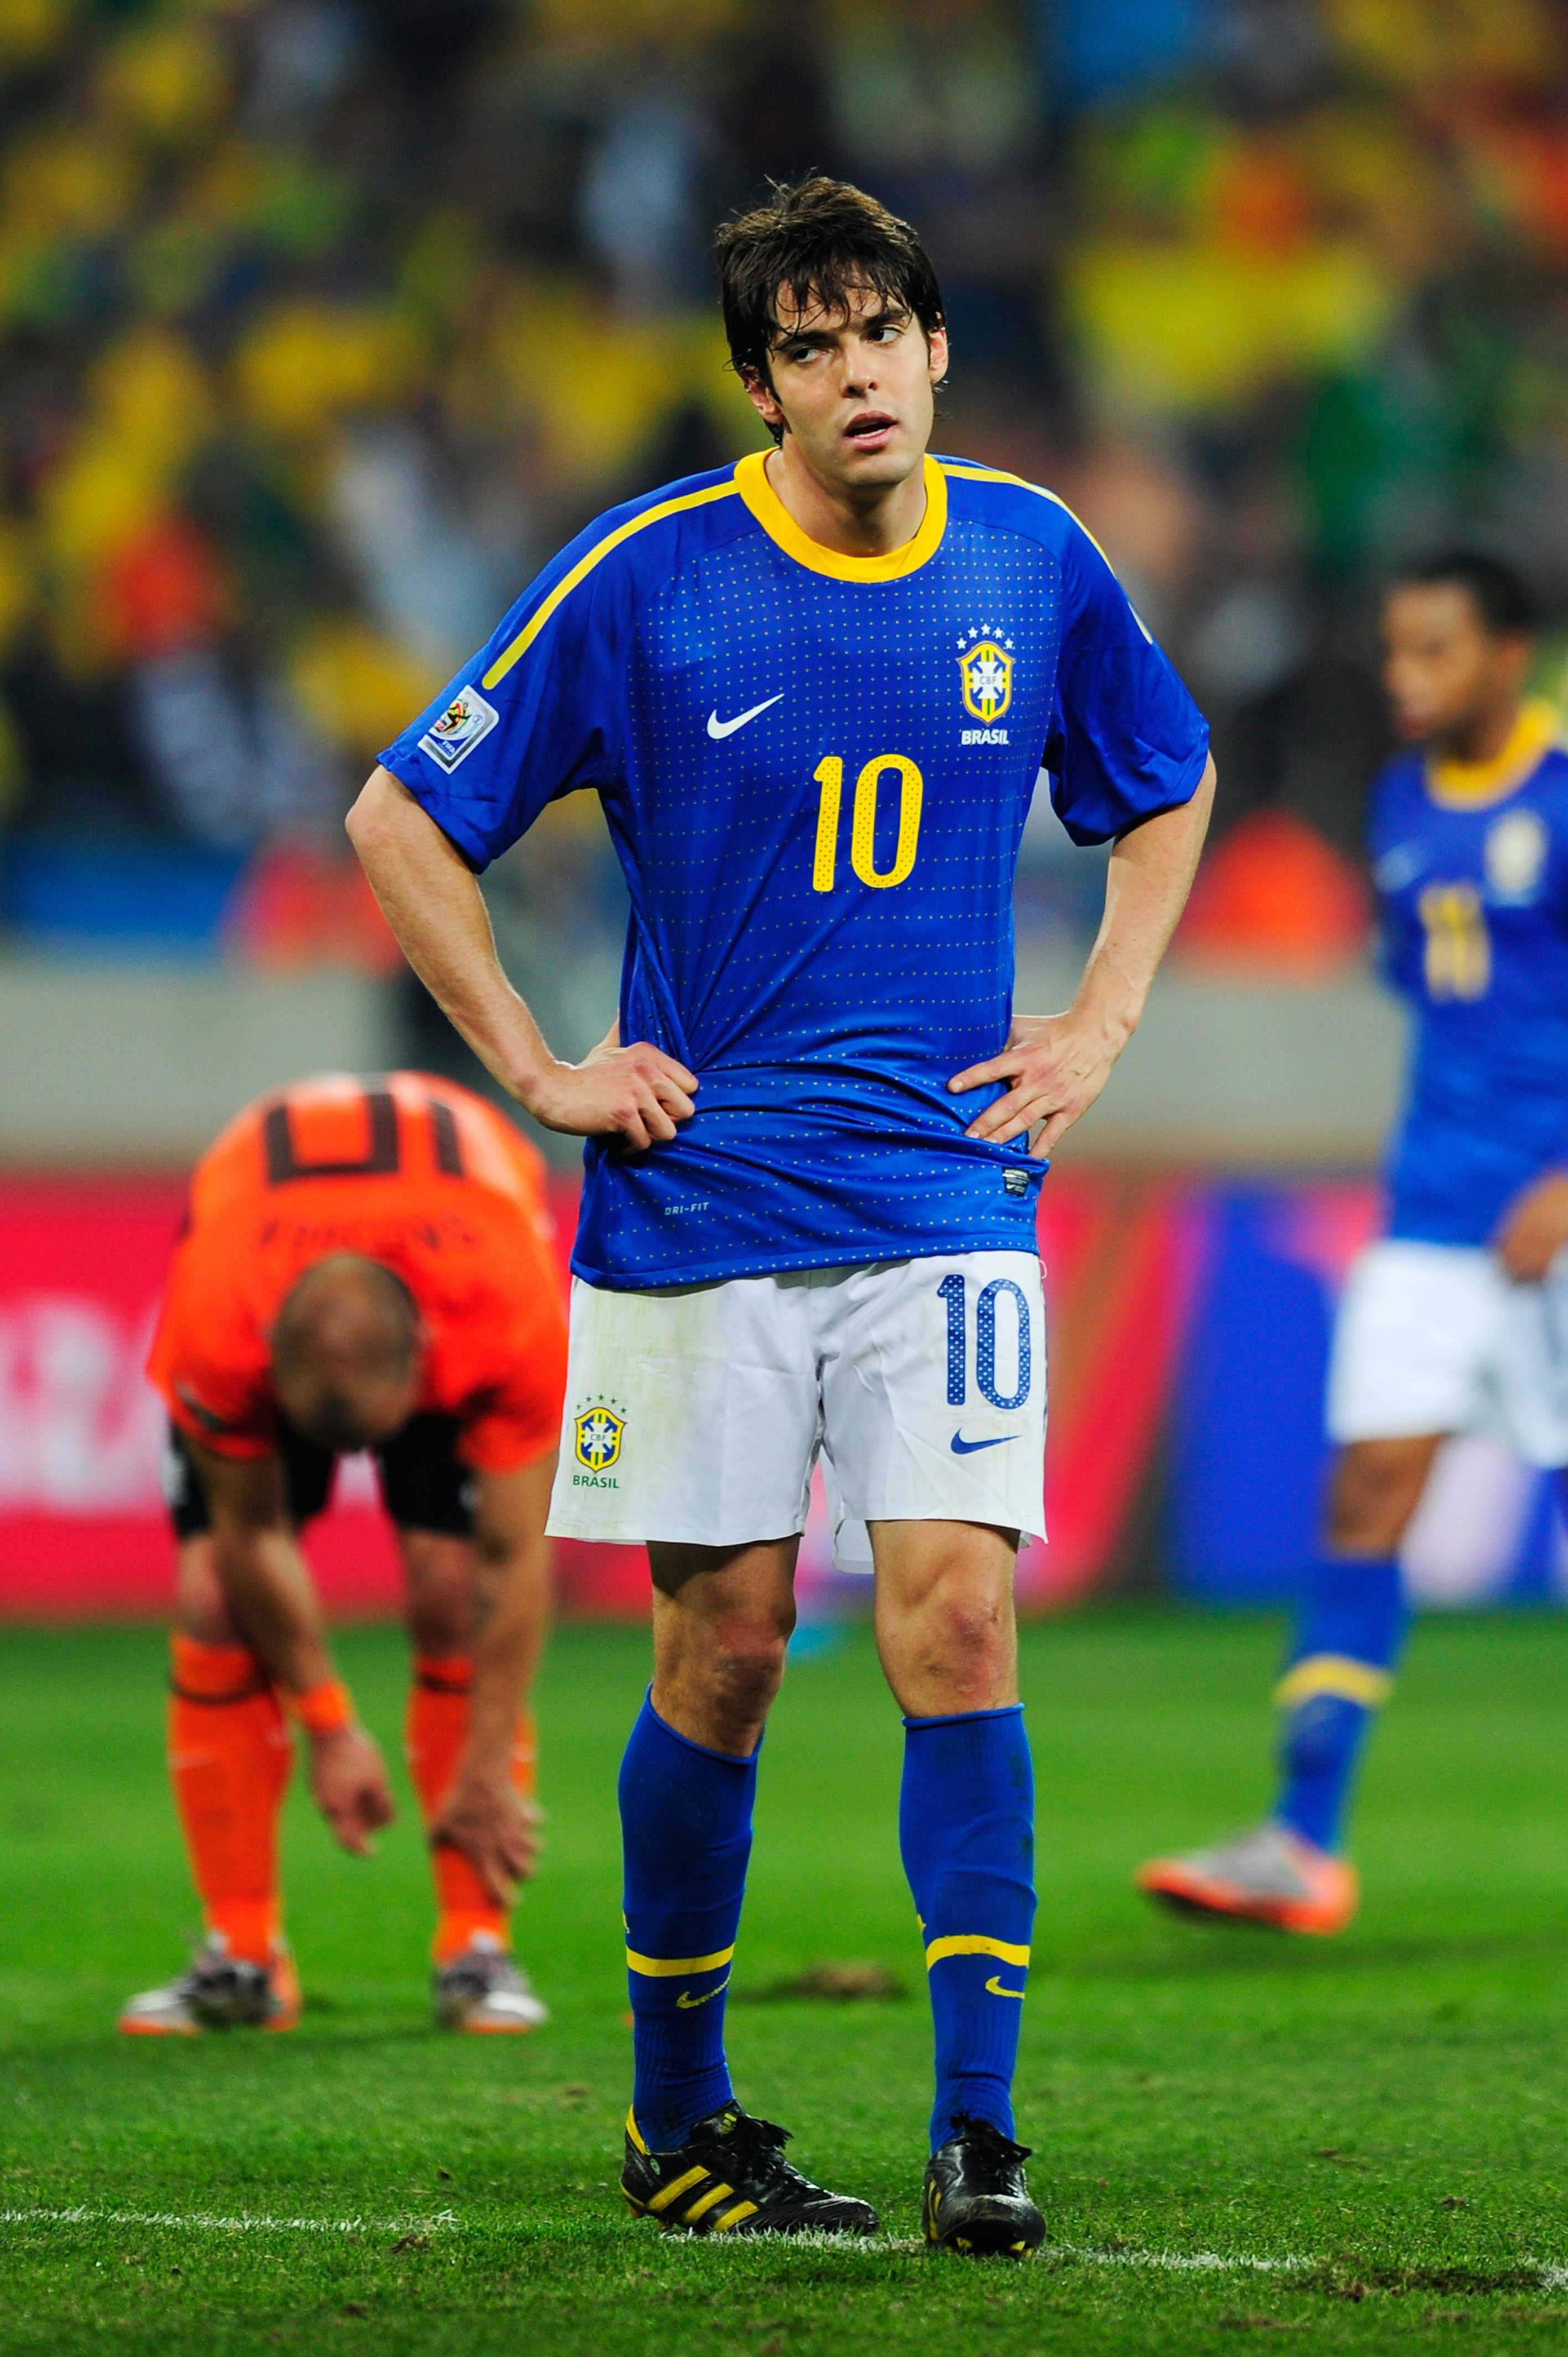 PORT ELIZABETH, SOUTH AFRICA - JULY 02: Kaka of Brazil looks dejected during the 2010 FIFA World Cup South Africa Quarter Final match between Netherlands and Brazil at Nelson Mandela Bay Stadium on July 2, 2010 in Nelson Mandela Bay/Port Elizabeth, South